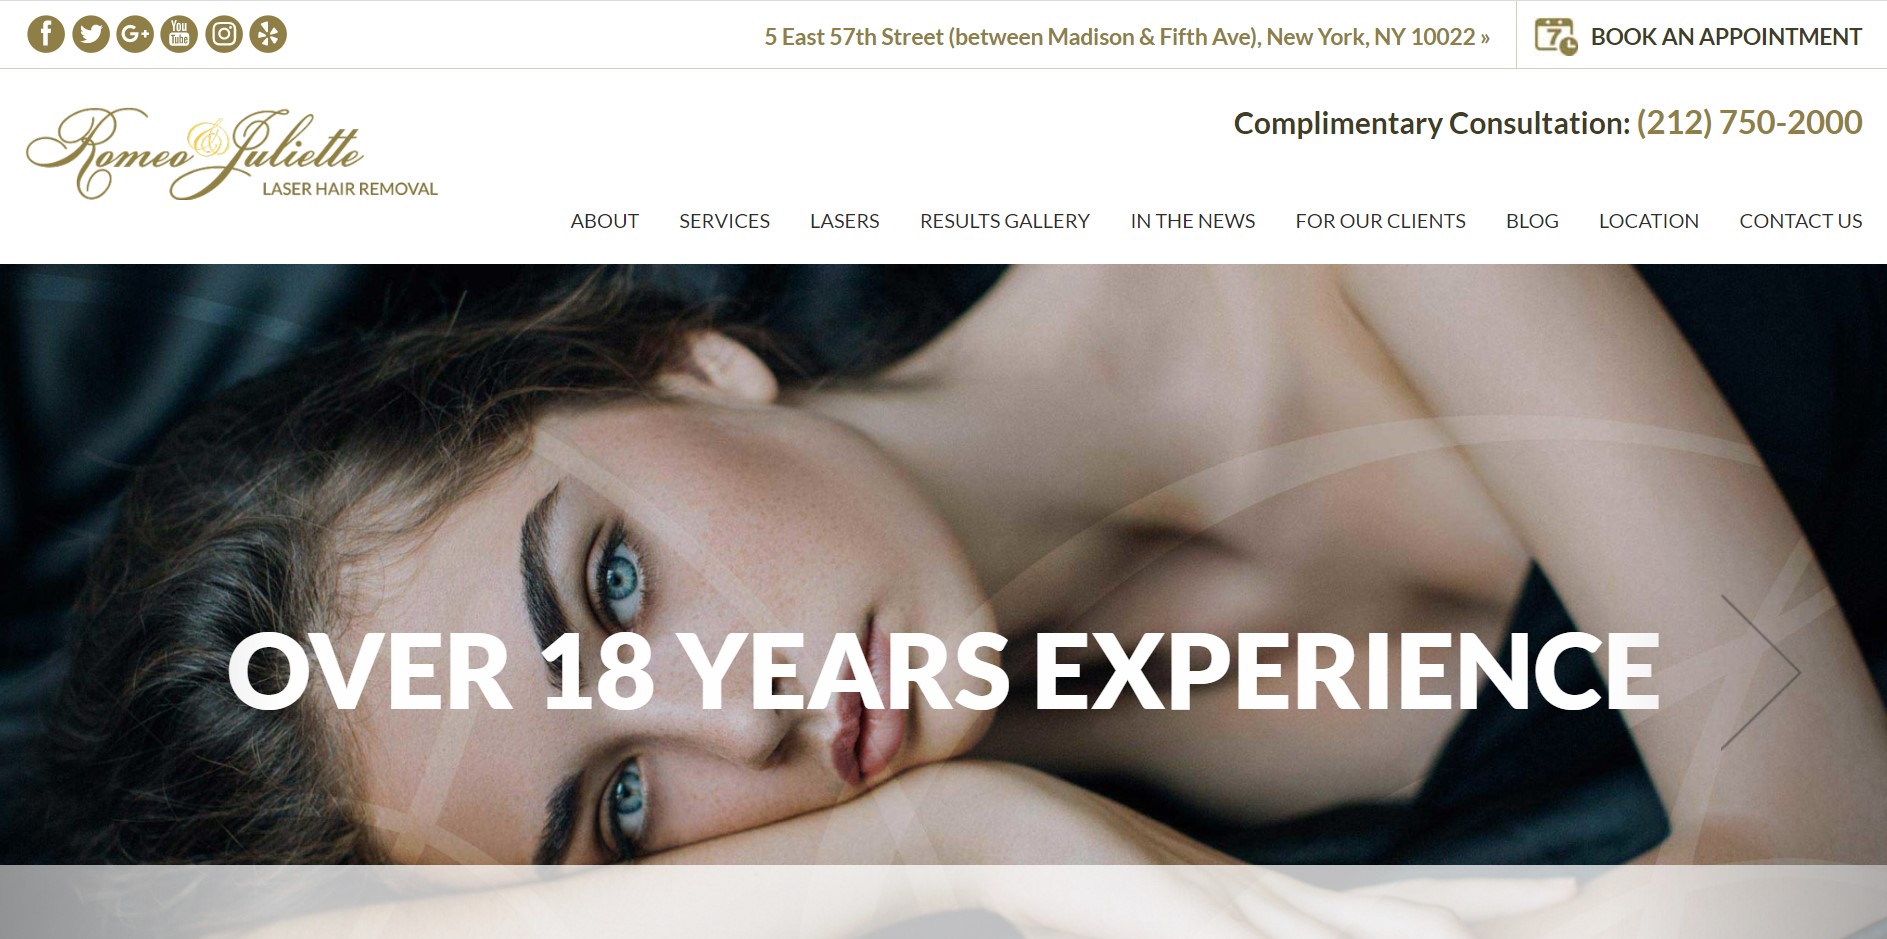 romeo and juliette hair removal clinic in new york